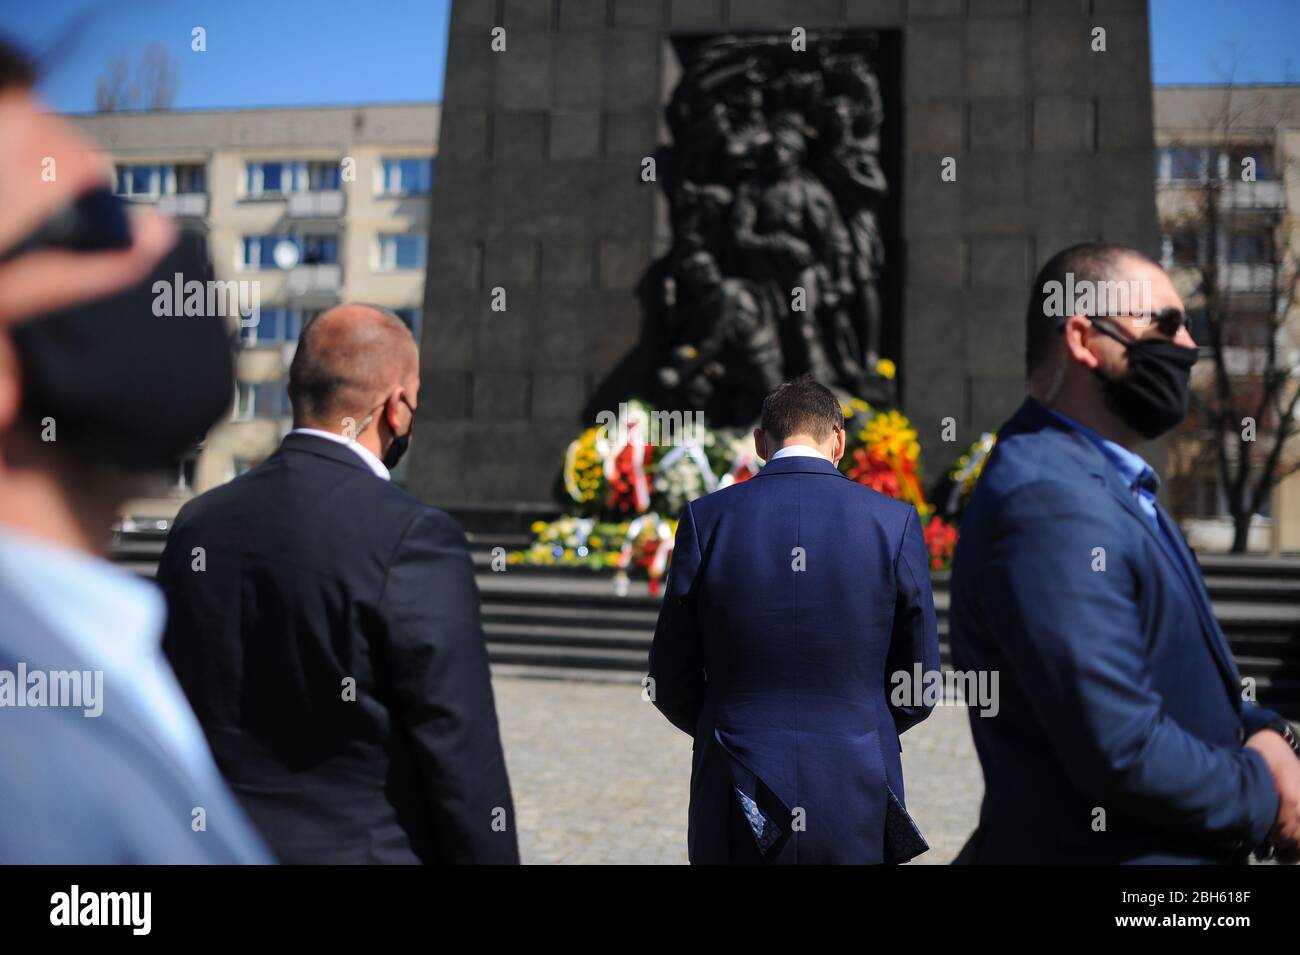 Warsaw, 19.04.2020. 77th anniversary of the outbreak of Warsaw Ghetto Uprising. by the Monument to the Ghetto Heroes. PICTURED : Polish Prime Minister Mateusz Morawiecki attends the ceremony as he wears a protective mask due to the coronavirus pandemic. , Image514288224, License: Rights-managed, Restrictions: , Model Release: no, Credit line: Adam Chelstowski / Forum Stock Photo